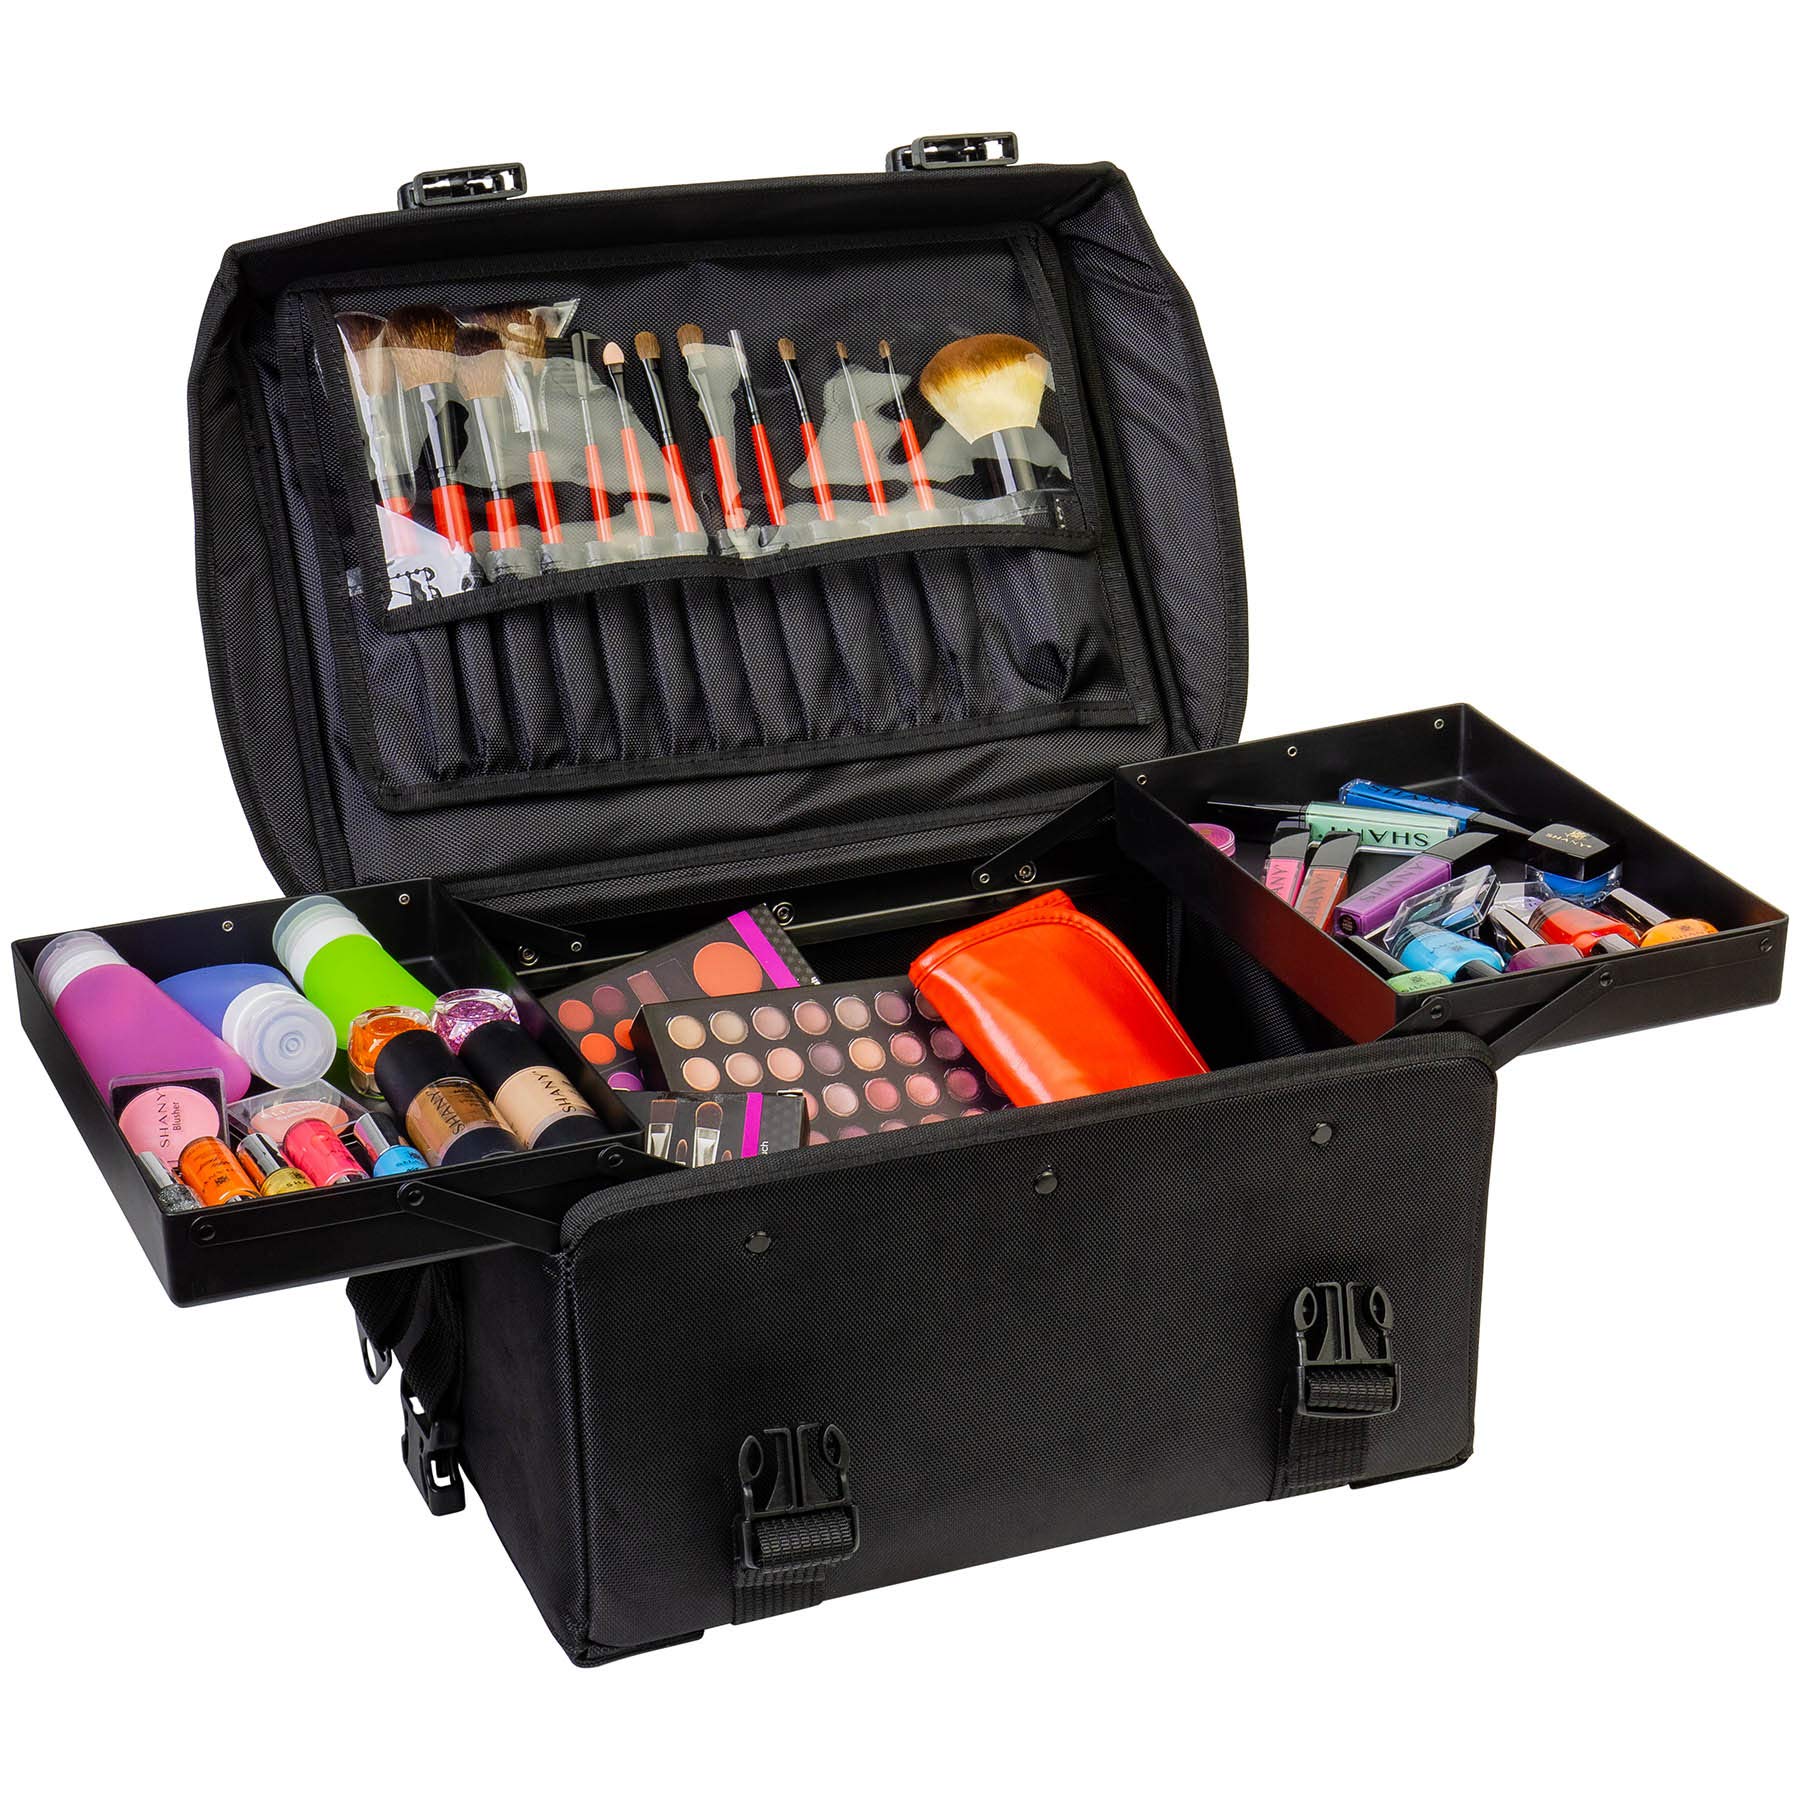 SHANY Soft Makeup Artist Rolling Trolley Cosmetic Case with Free Set of Mesh Bags - Jet Black